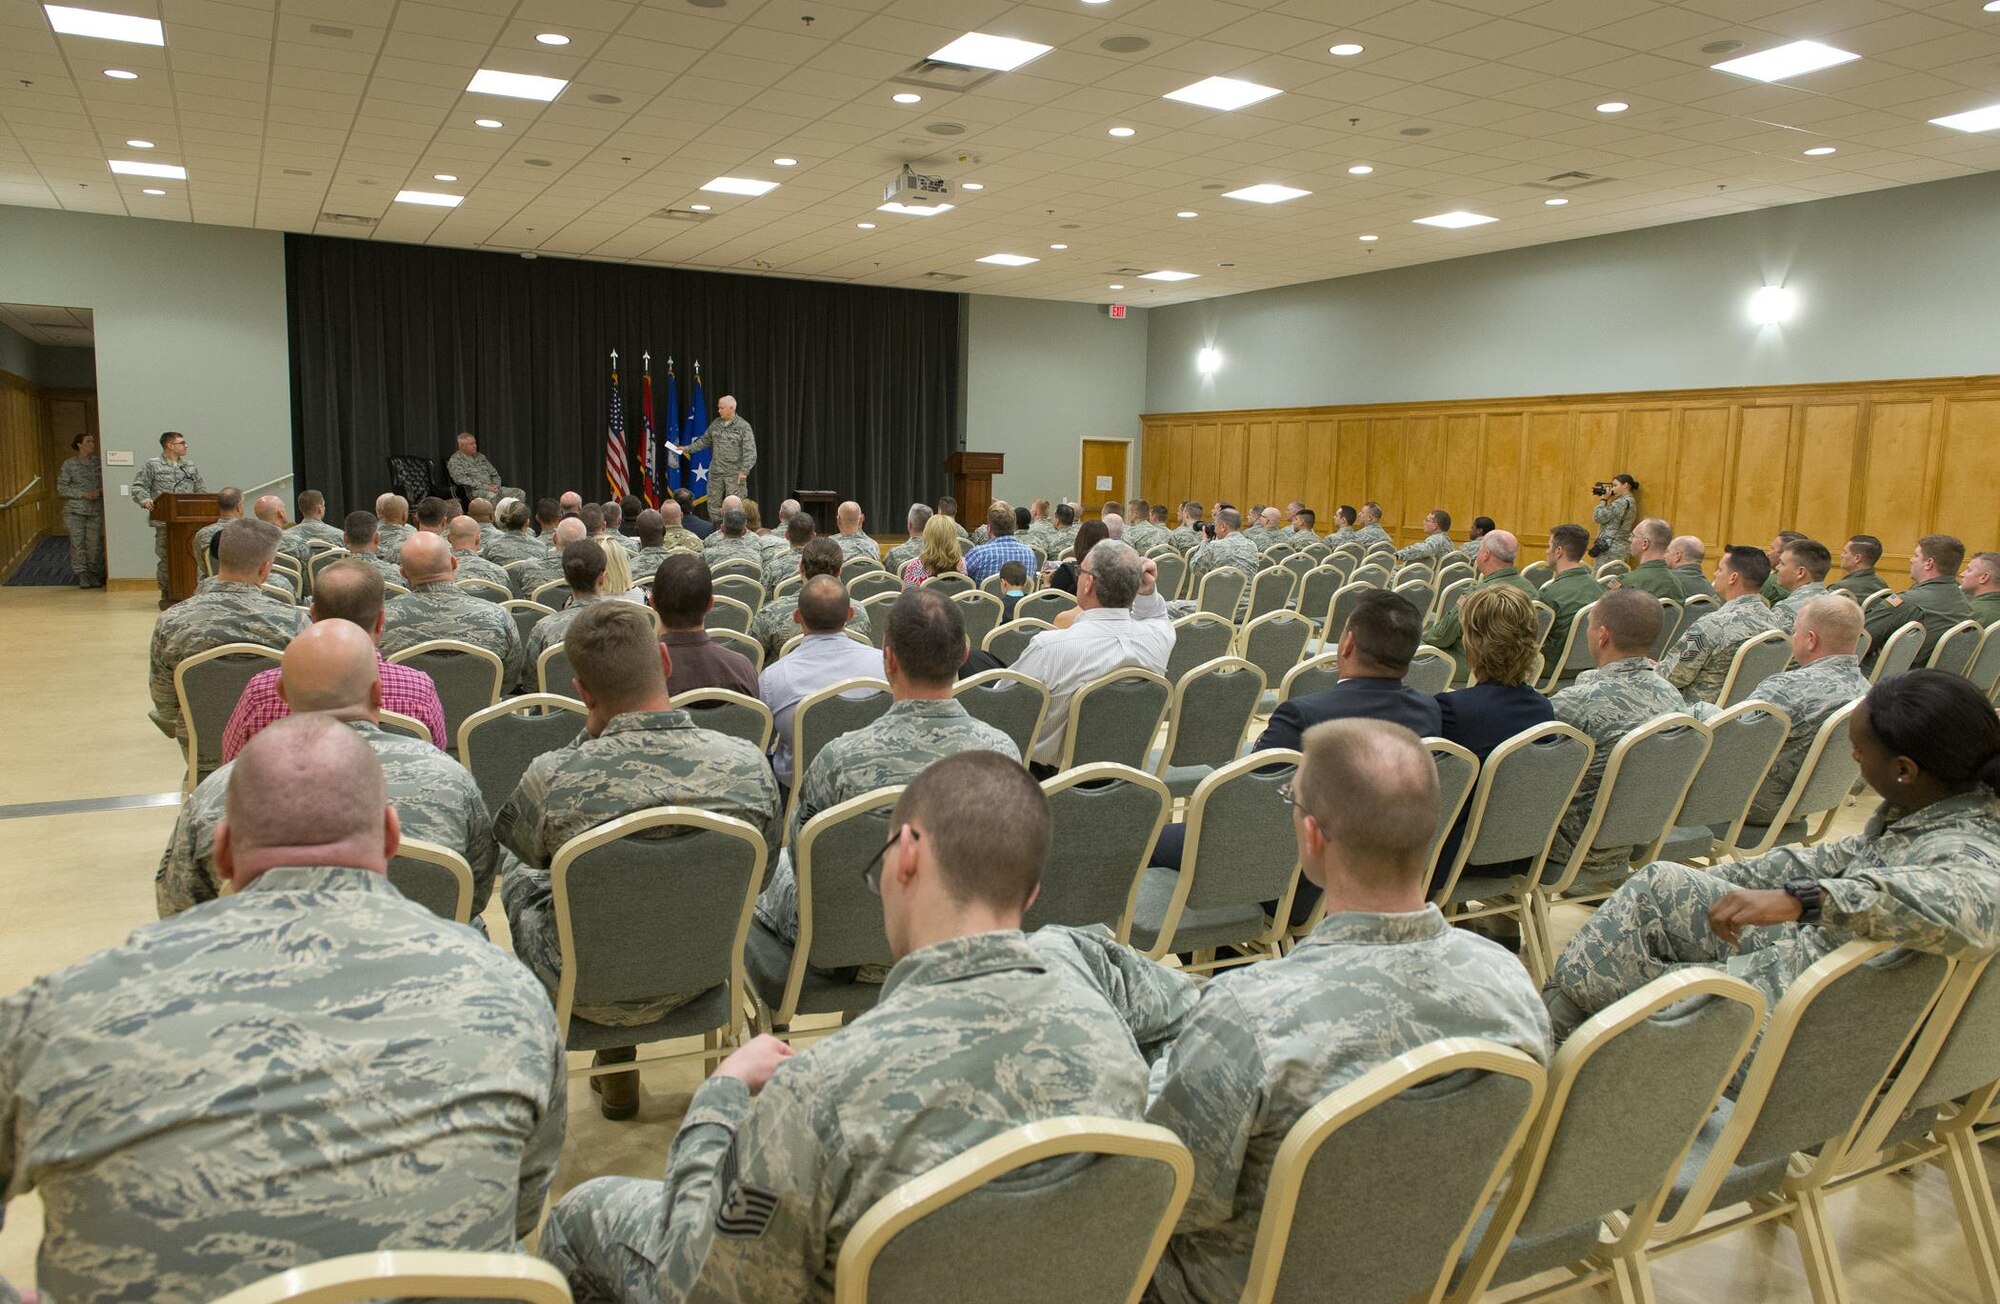 Lt. Gen. L. Scott Rice, director of the Air National Guard, delivers remarks during a graduation ceremony for the first class of the Air Force's Cyber Skills Validation Course held March 29, 2017, at Little Rock Air Force Base, Arkansas. The course is designed to take ANG Airmen with preexisting cyber skills and accelerate their training in the Cyber Warfare career field. (U.S. Air National Guard photo by Master Sgt. Marvin R. Preston)